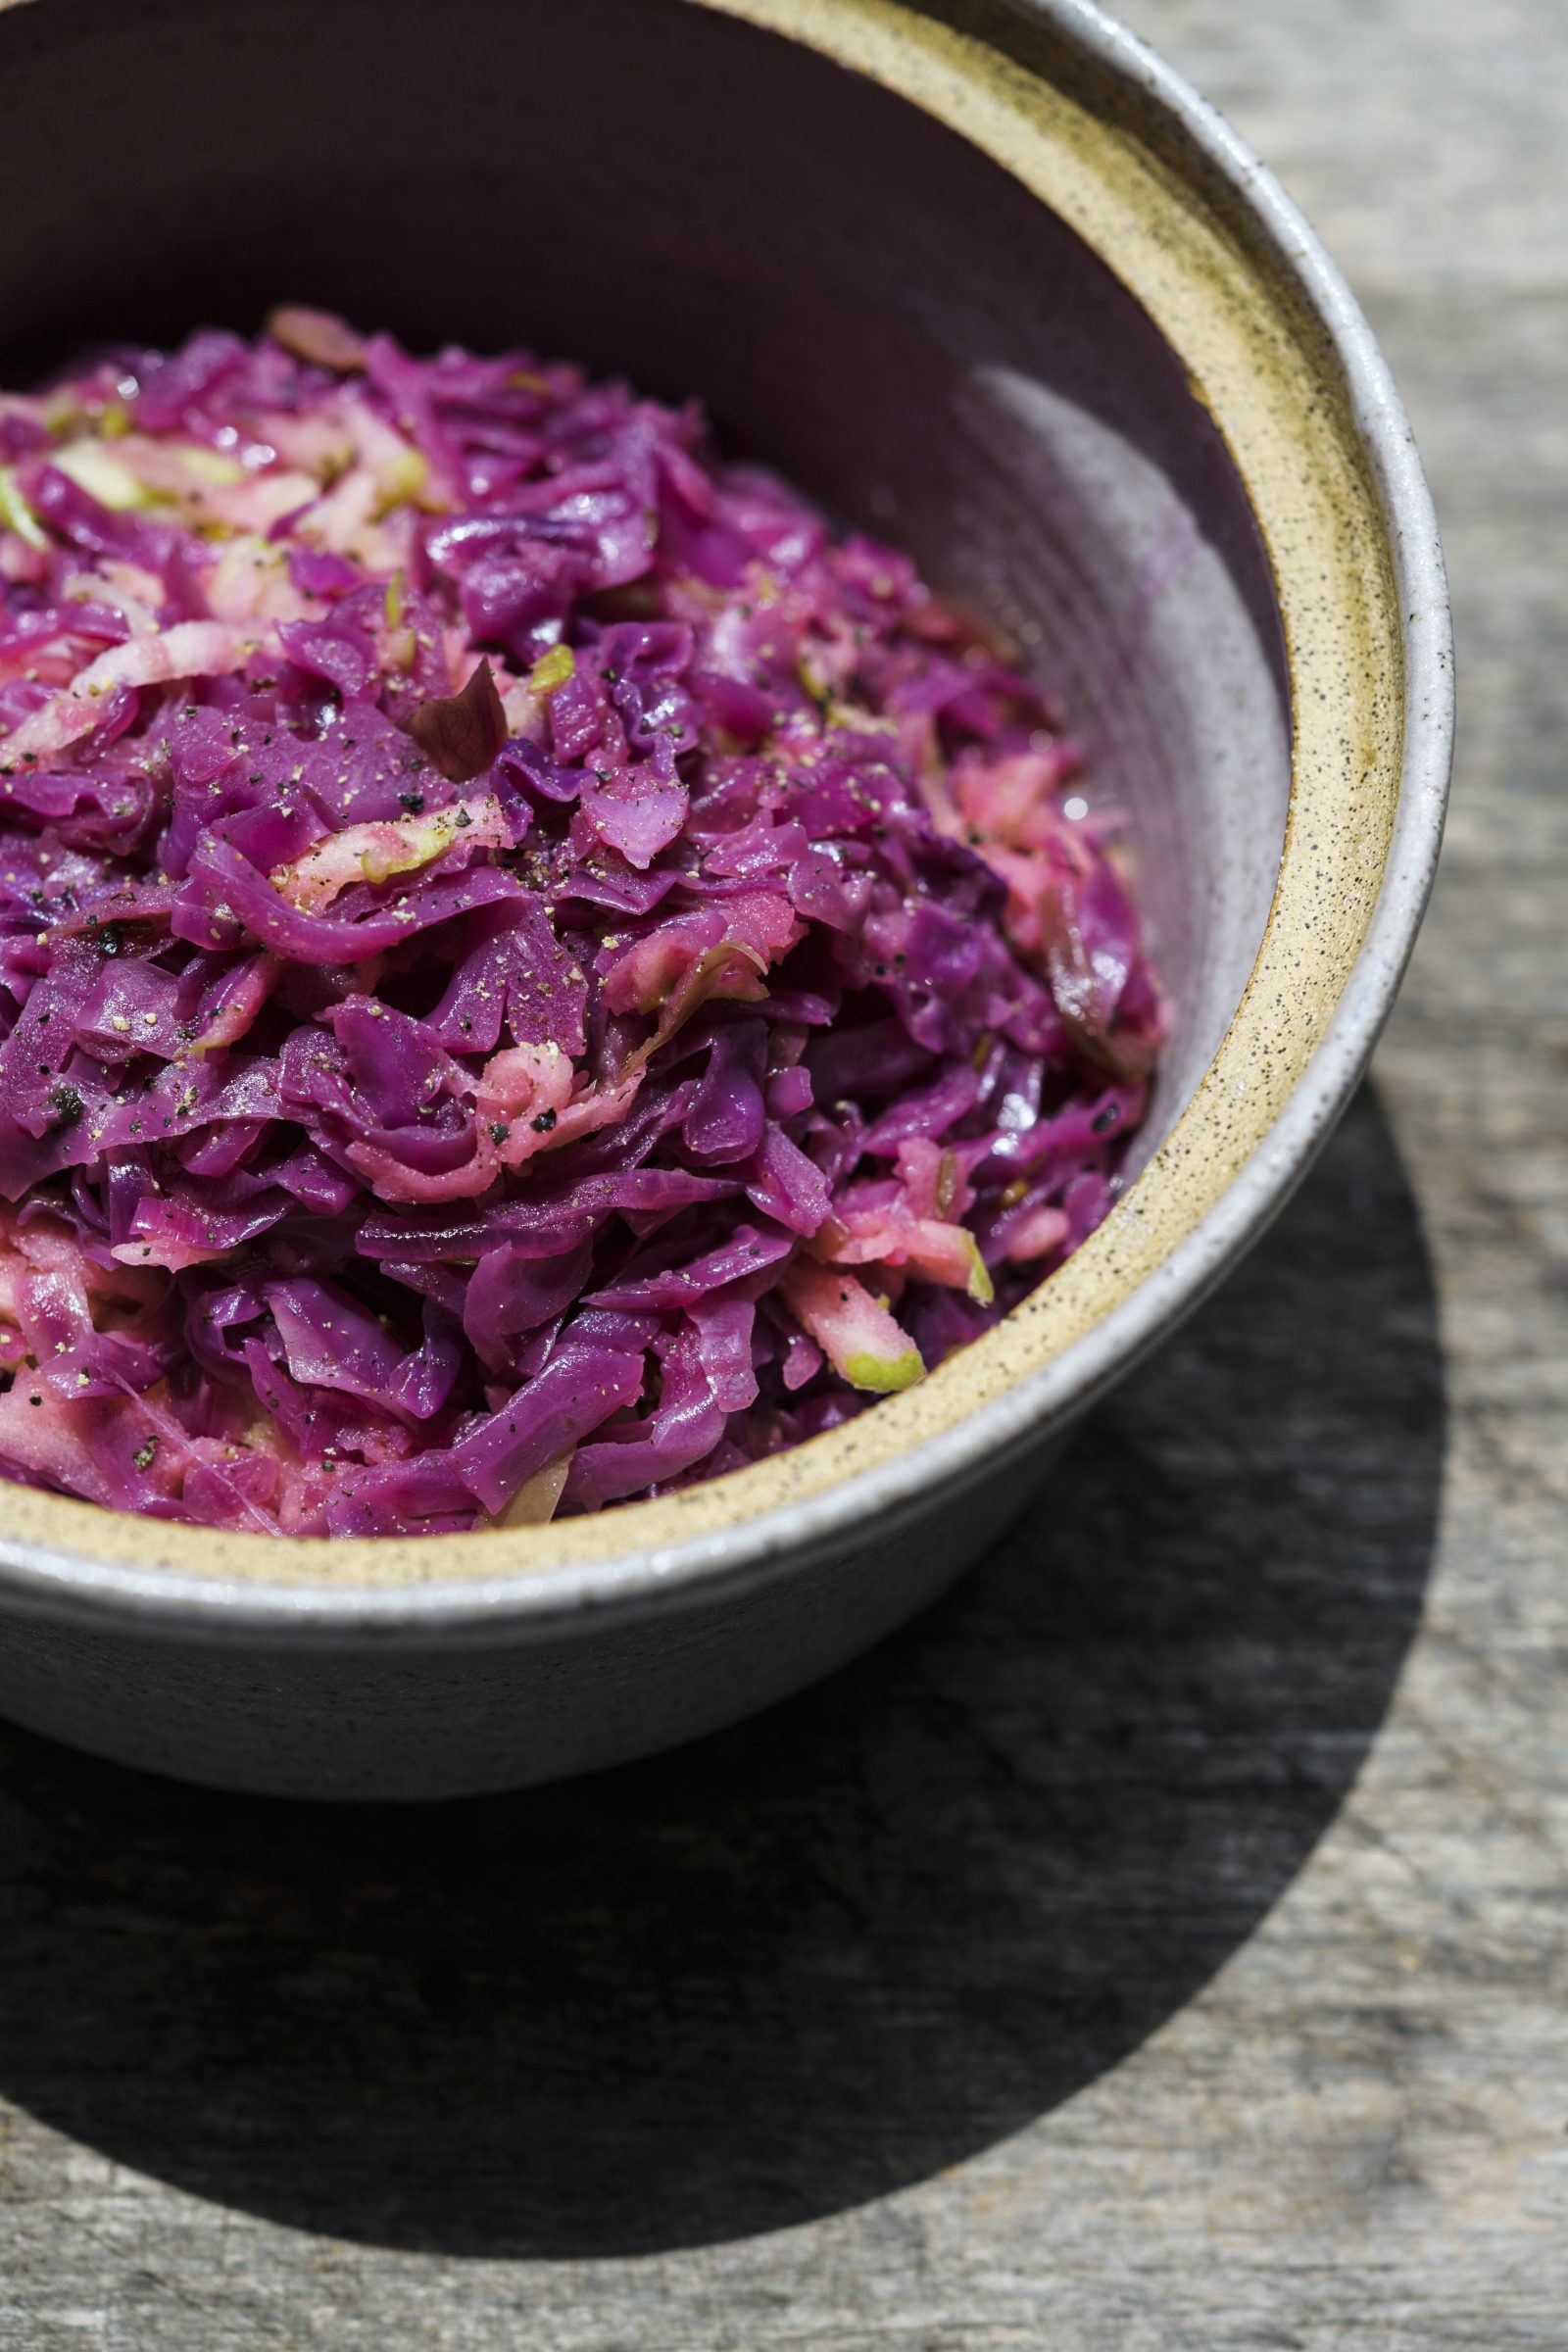 Braised Red Cabbage with Apples and Juniper